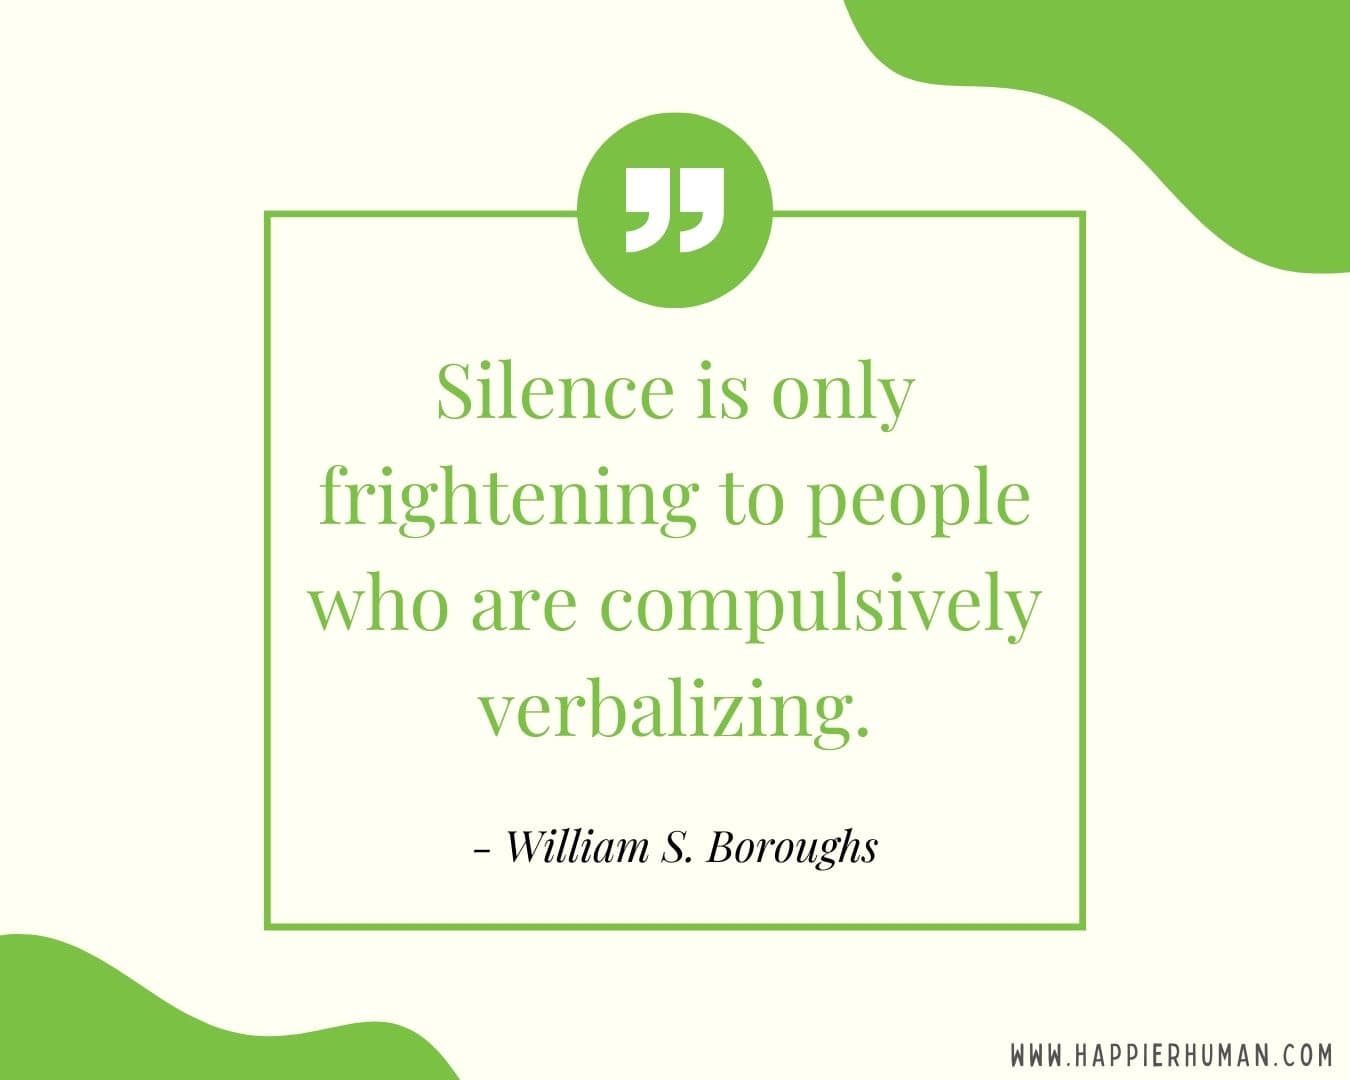 Introvert Quotes - “Silence is only frightening to people who are compulsively verbalizing.” – William S. Boroughs